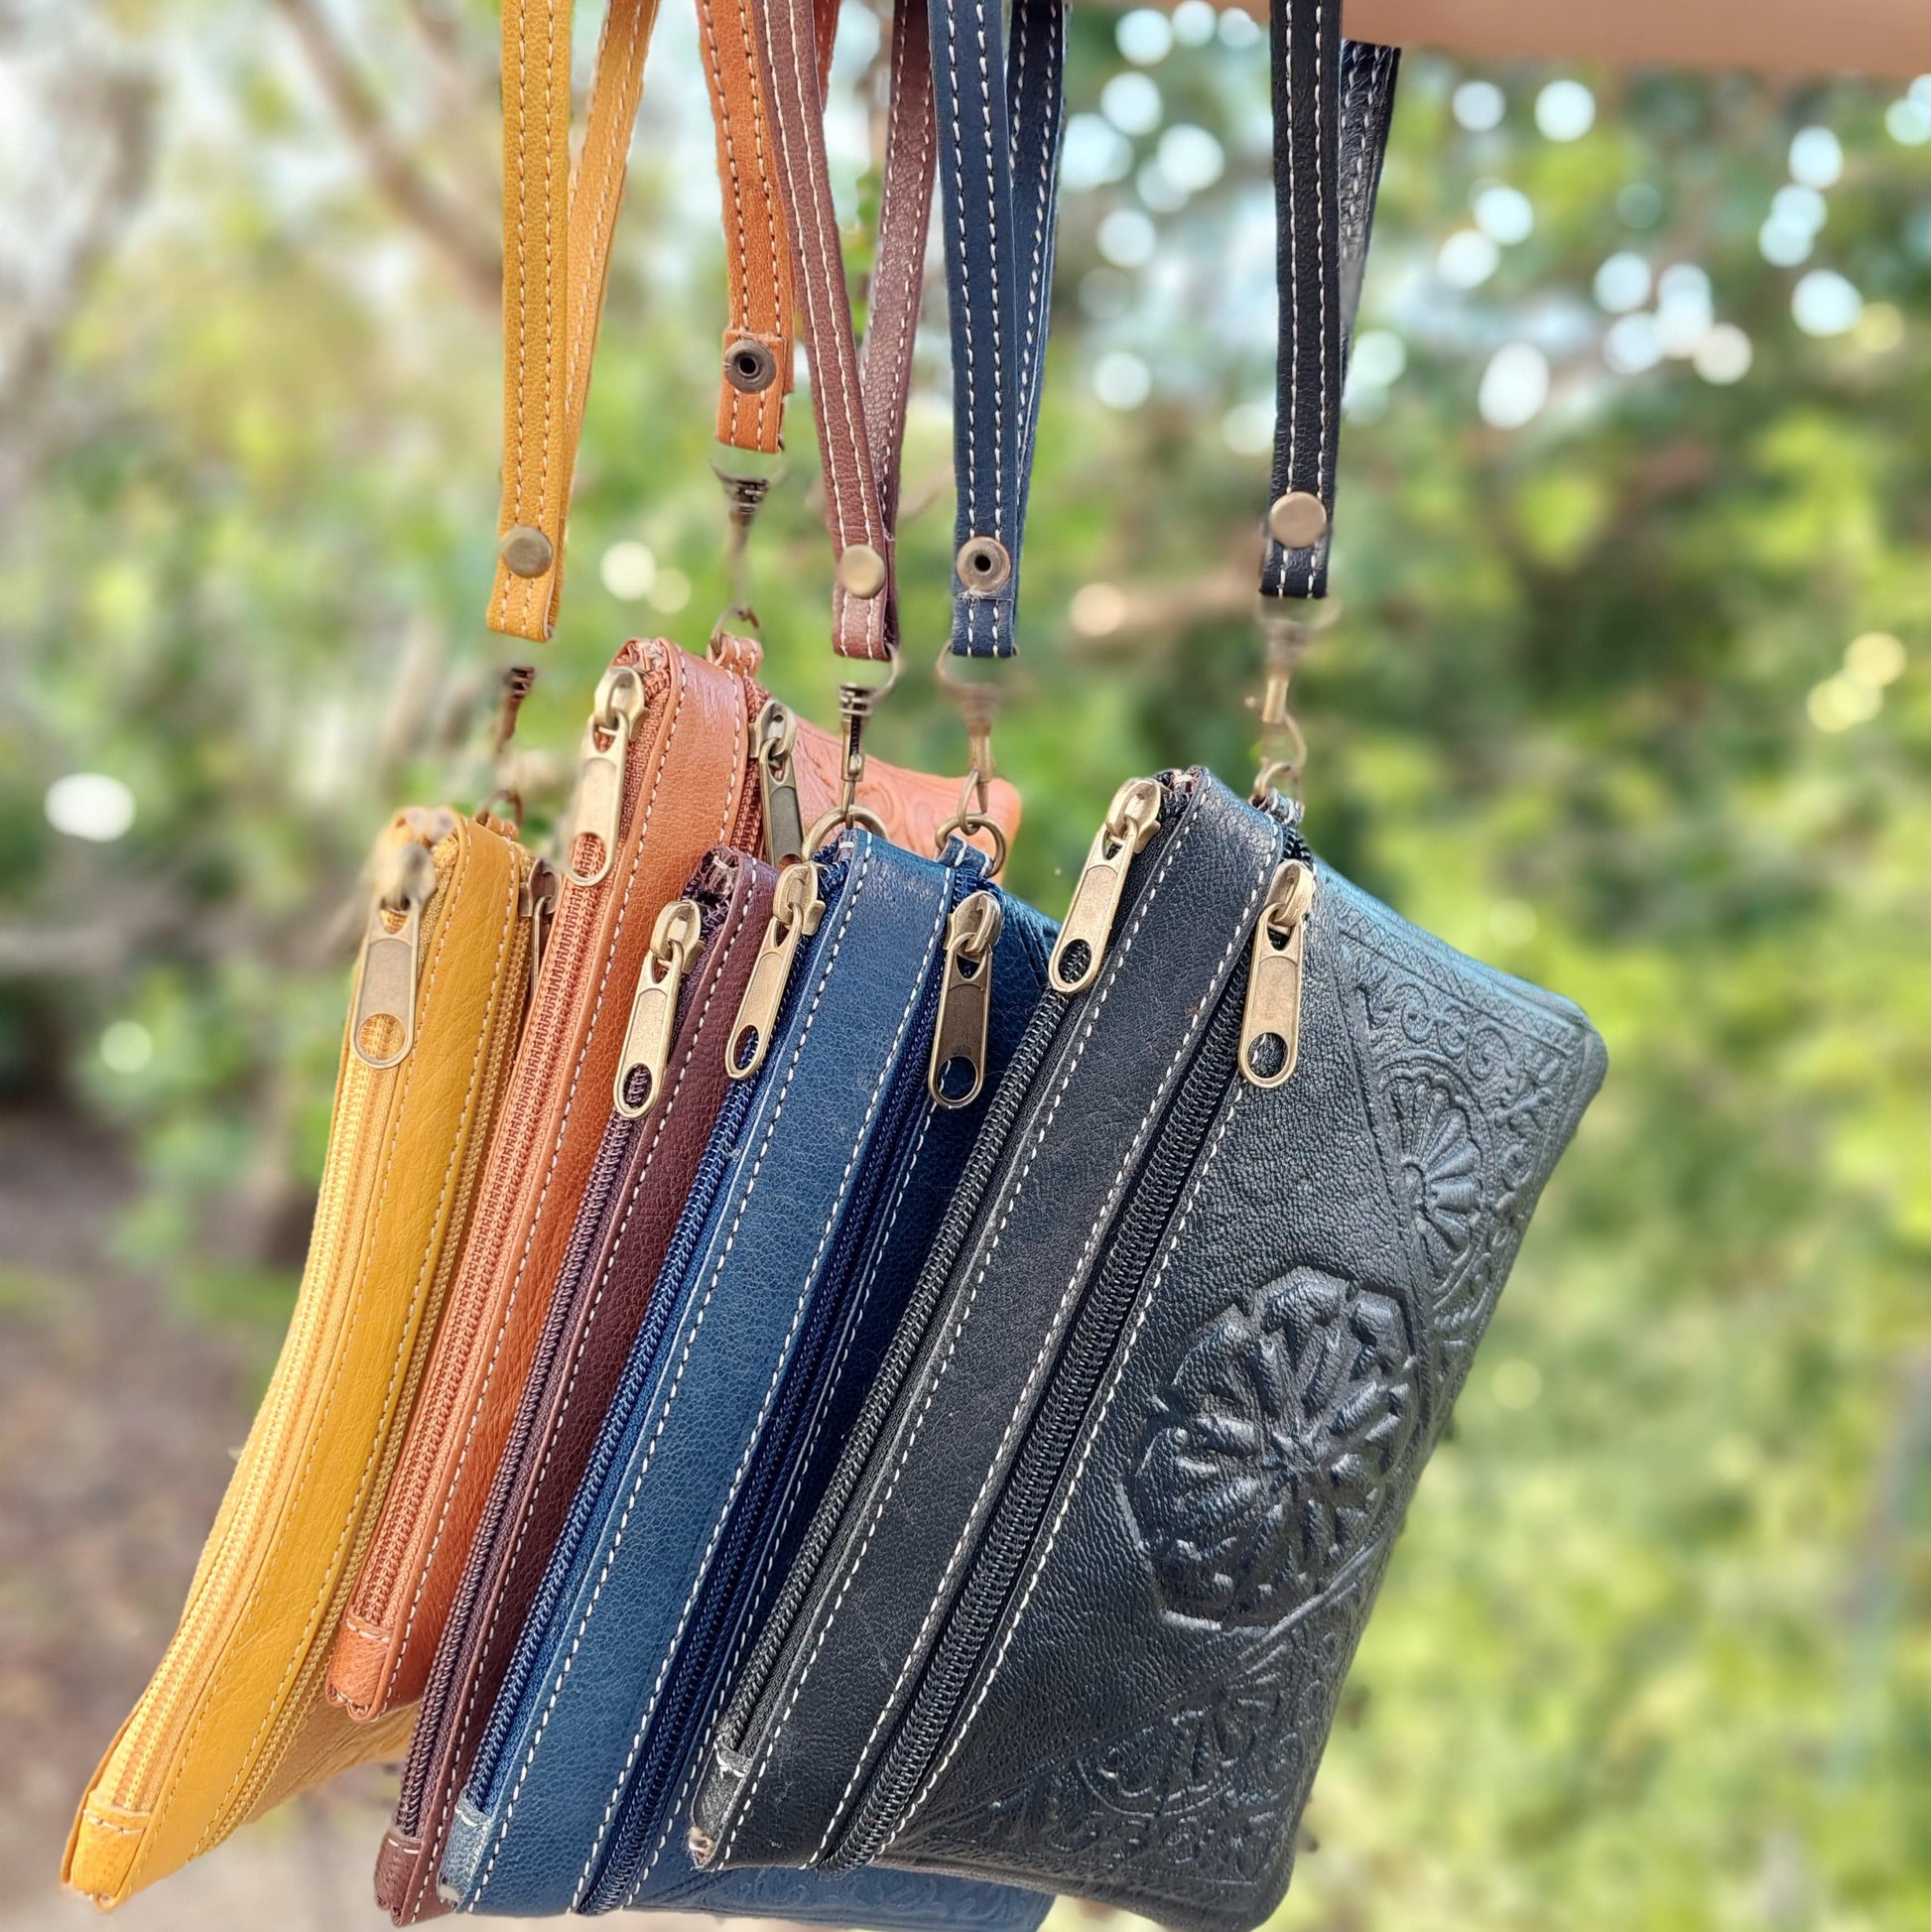 Wristlets - Carry all, Pouch, Clutch